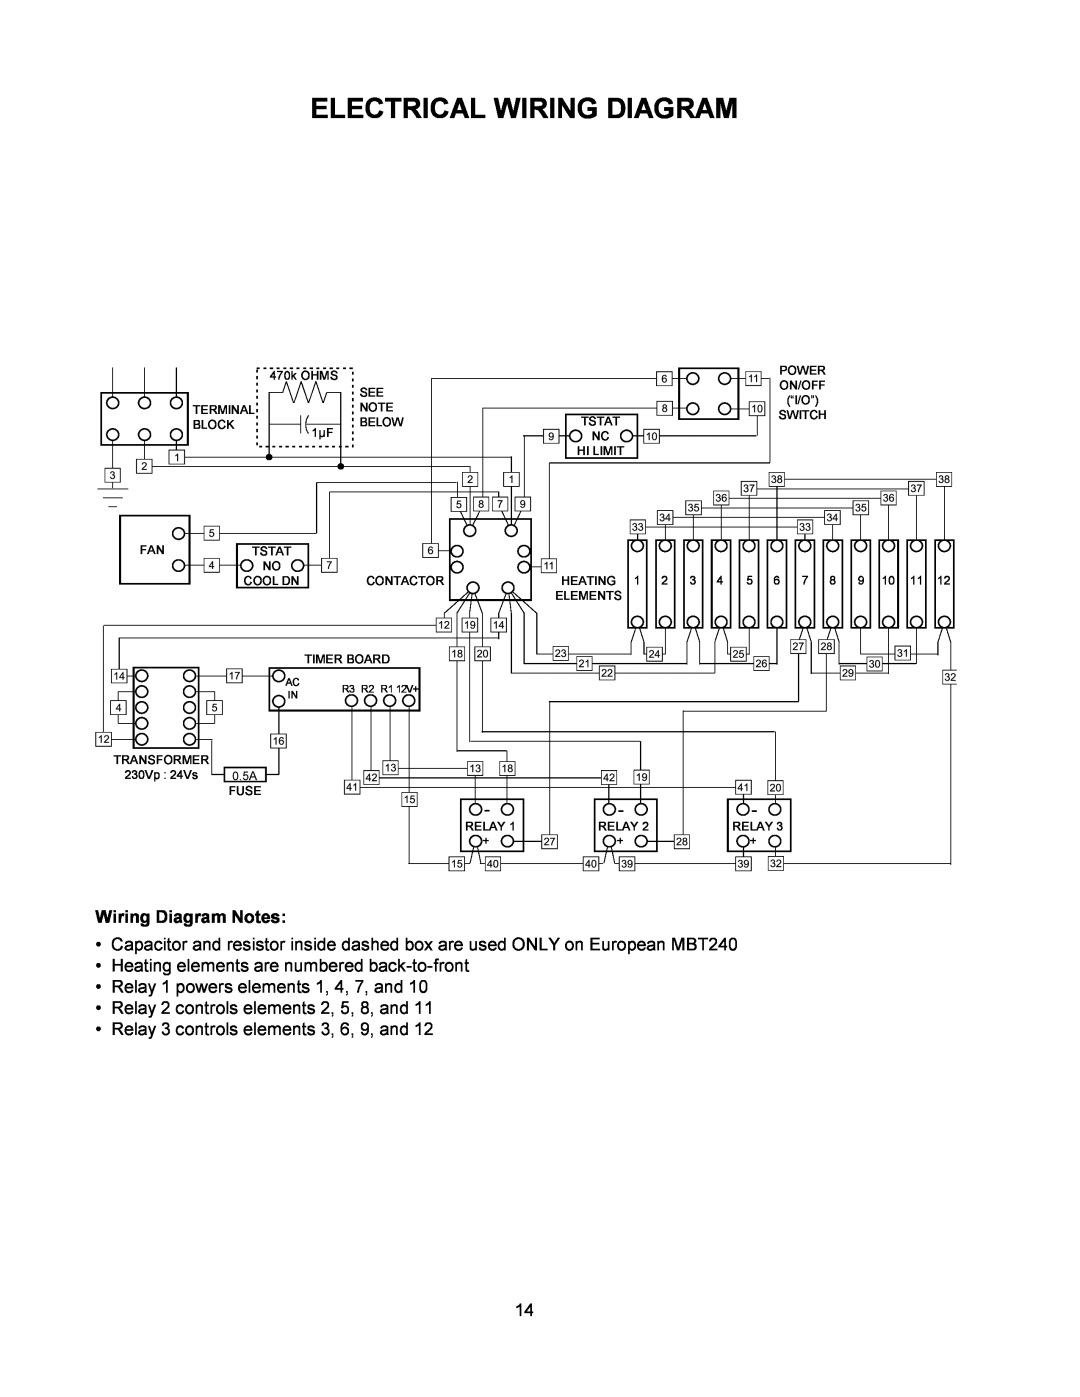 Toastmaster MBT240, MBT208 warranty Electrical Wiring Diagram, Wiring Diagram Notes 